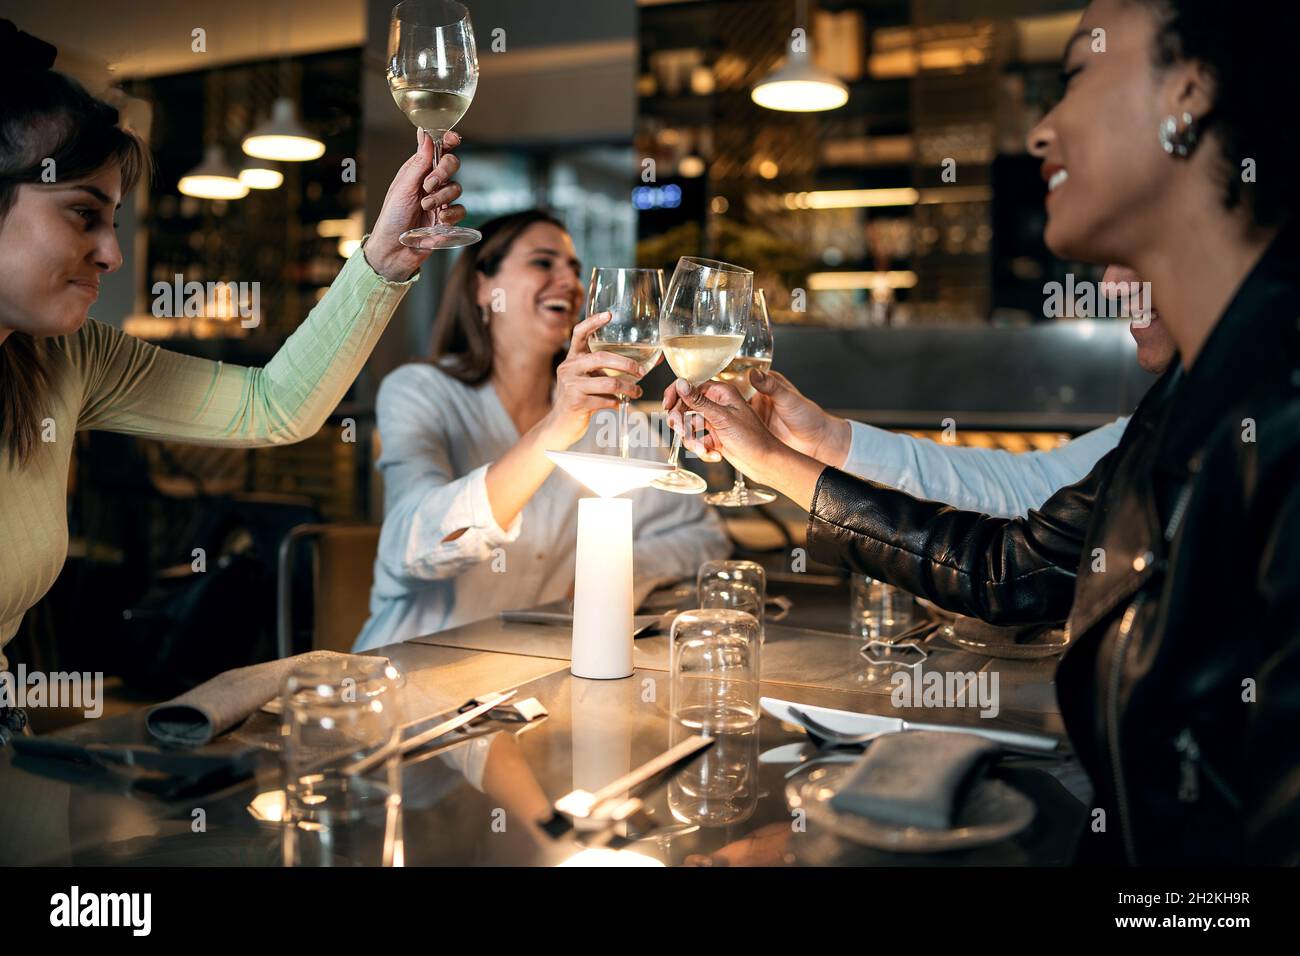 Multicultural smiling best friends toasting white wine at fusion bar restaurant - Food concept with young people having fun together Stock Photo